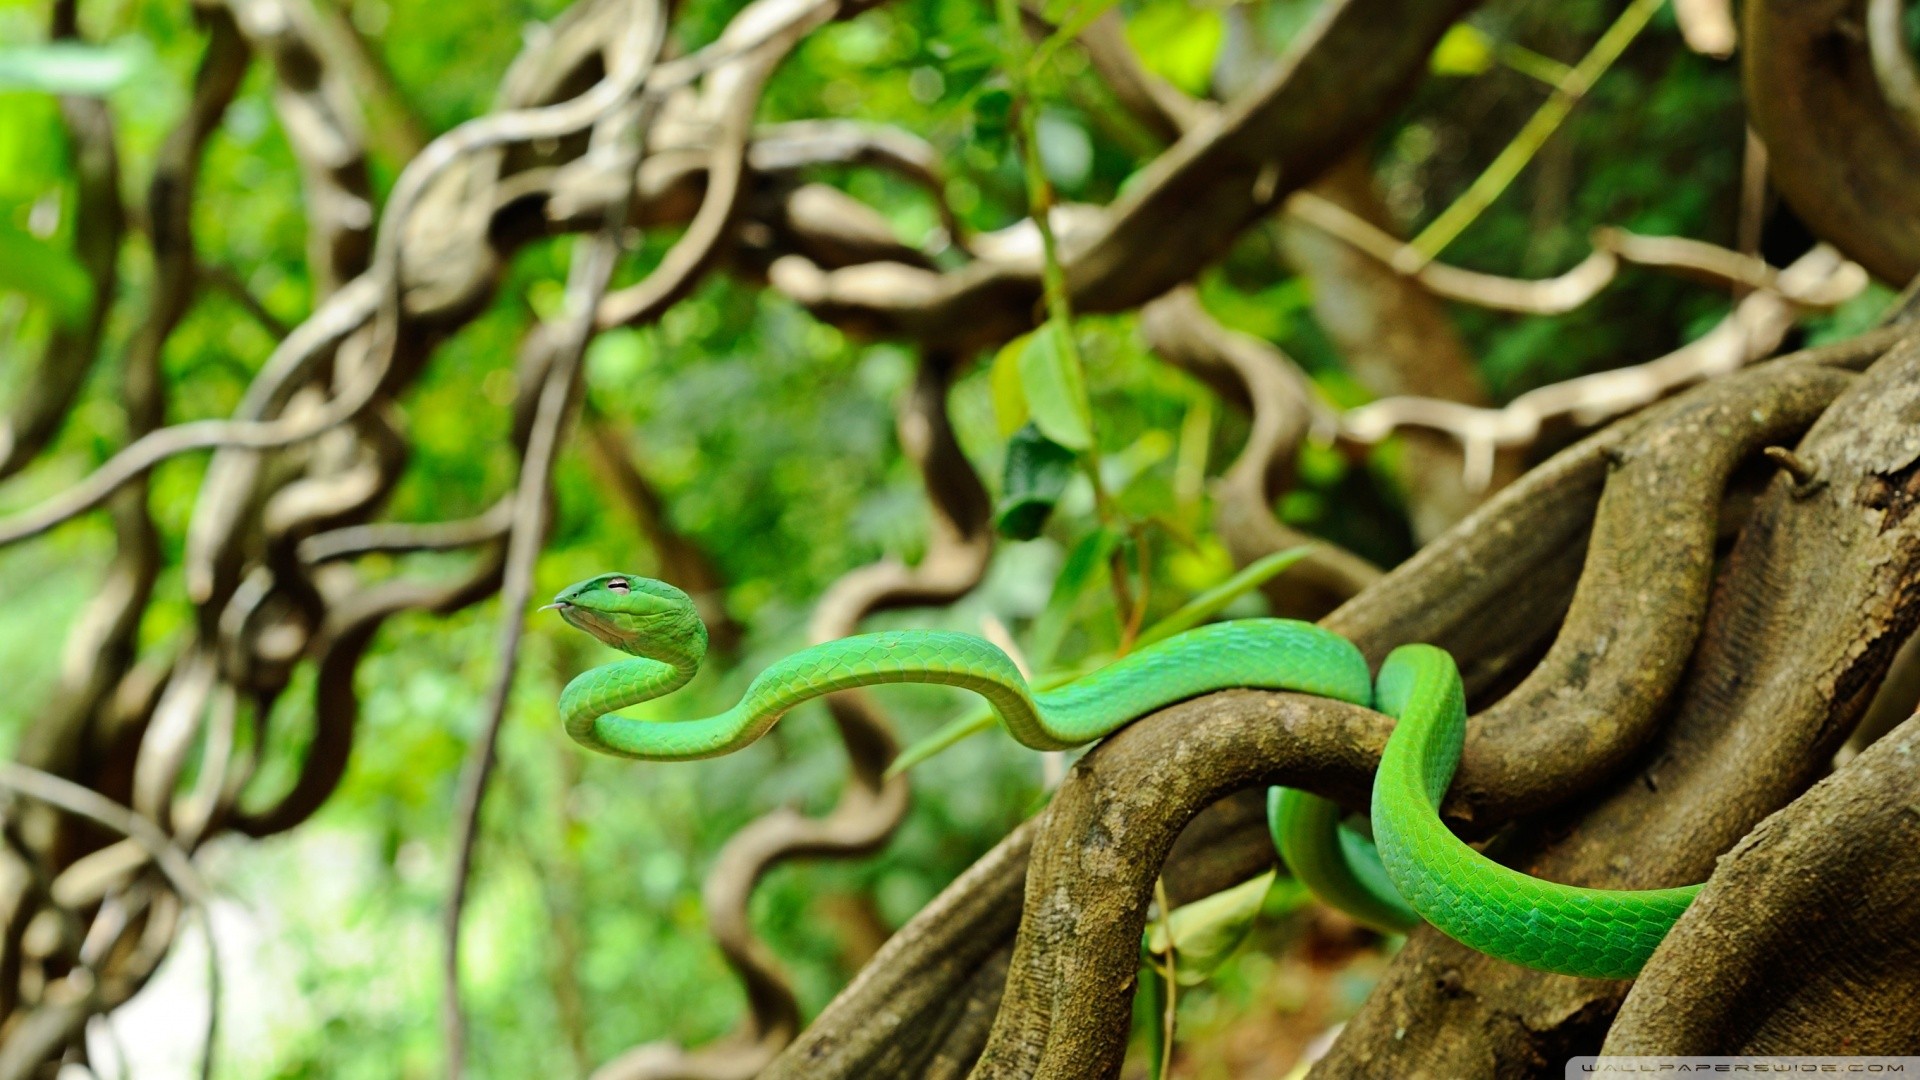 General 1920x1080 animals wildlife snake depth of field reptiles green branch roots nature